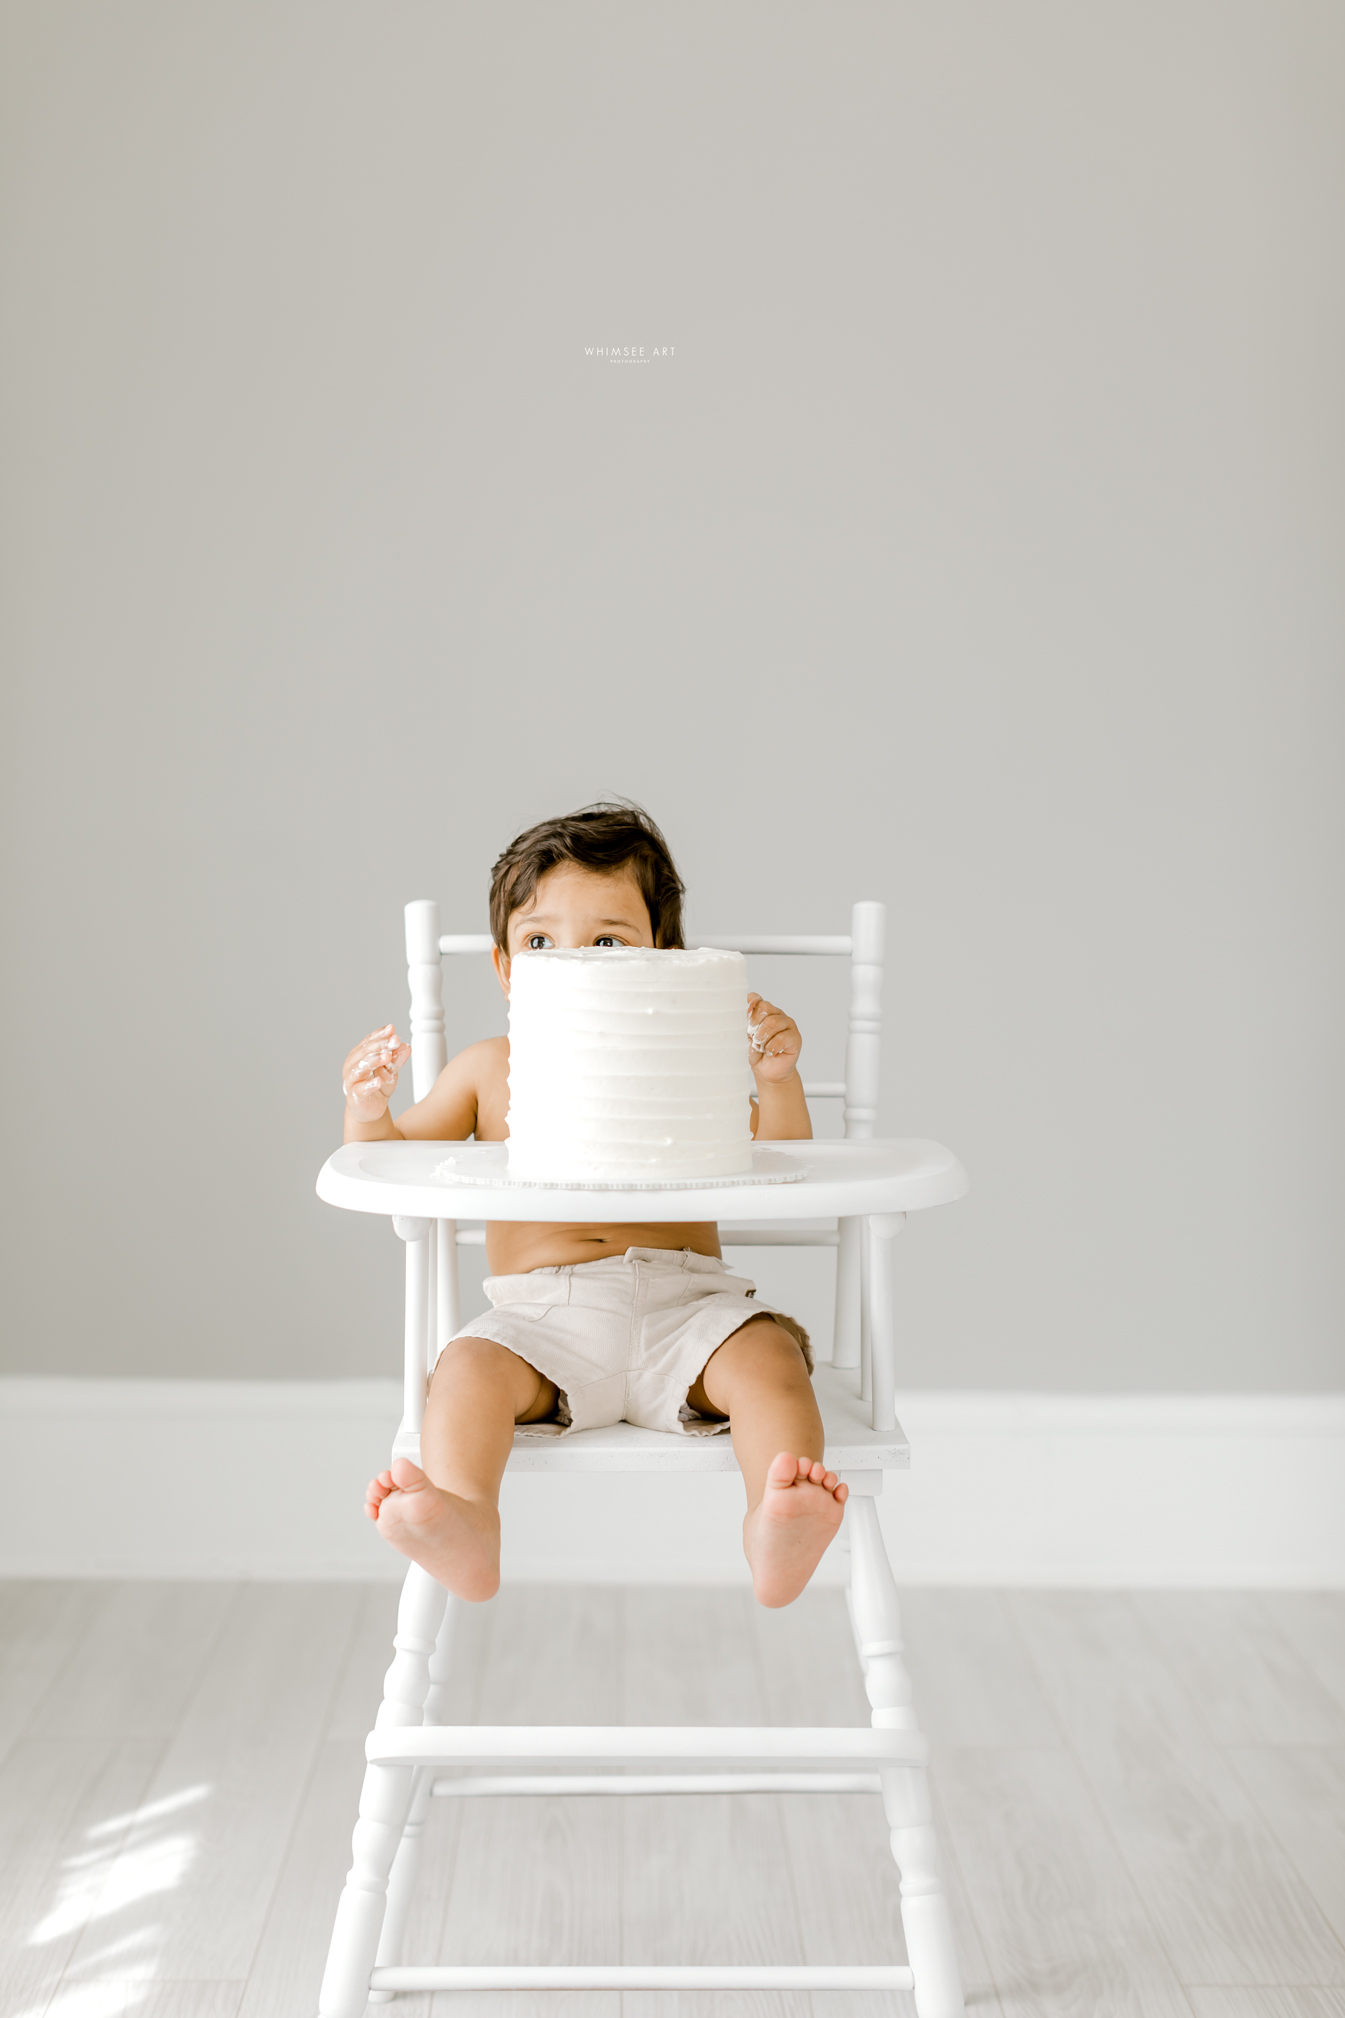 Happy Birthday Aarav | One Year Session | Whimsee Art Photographer